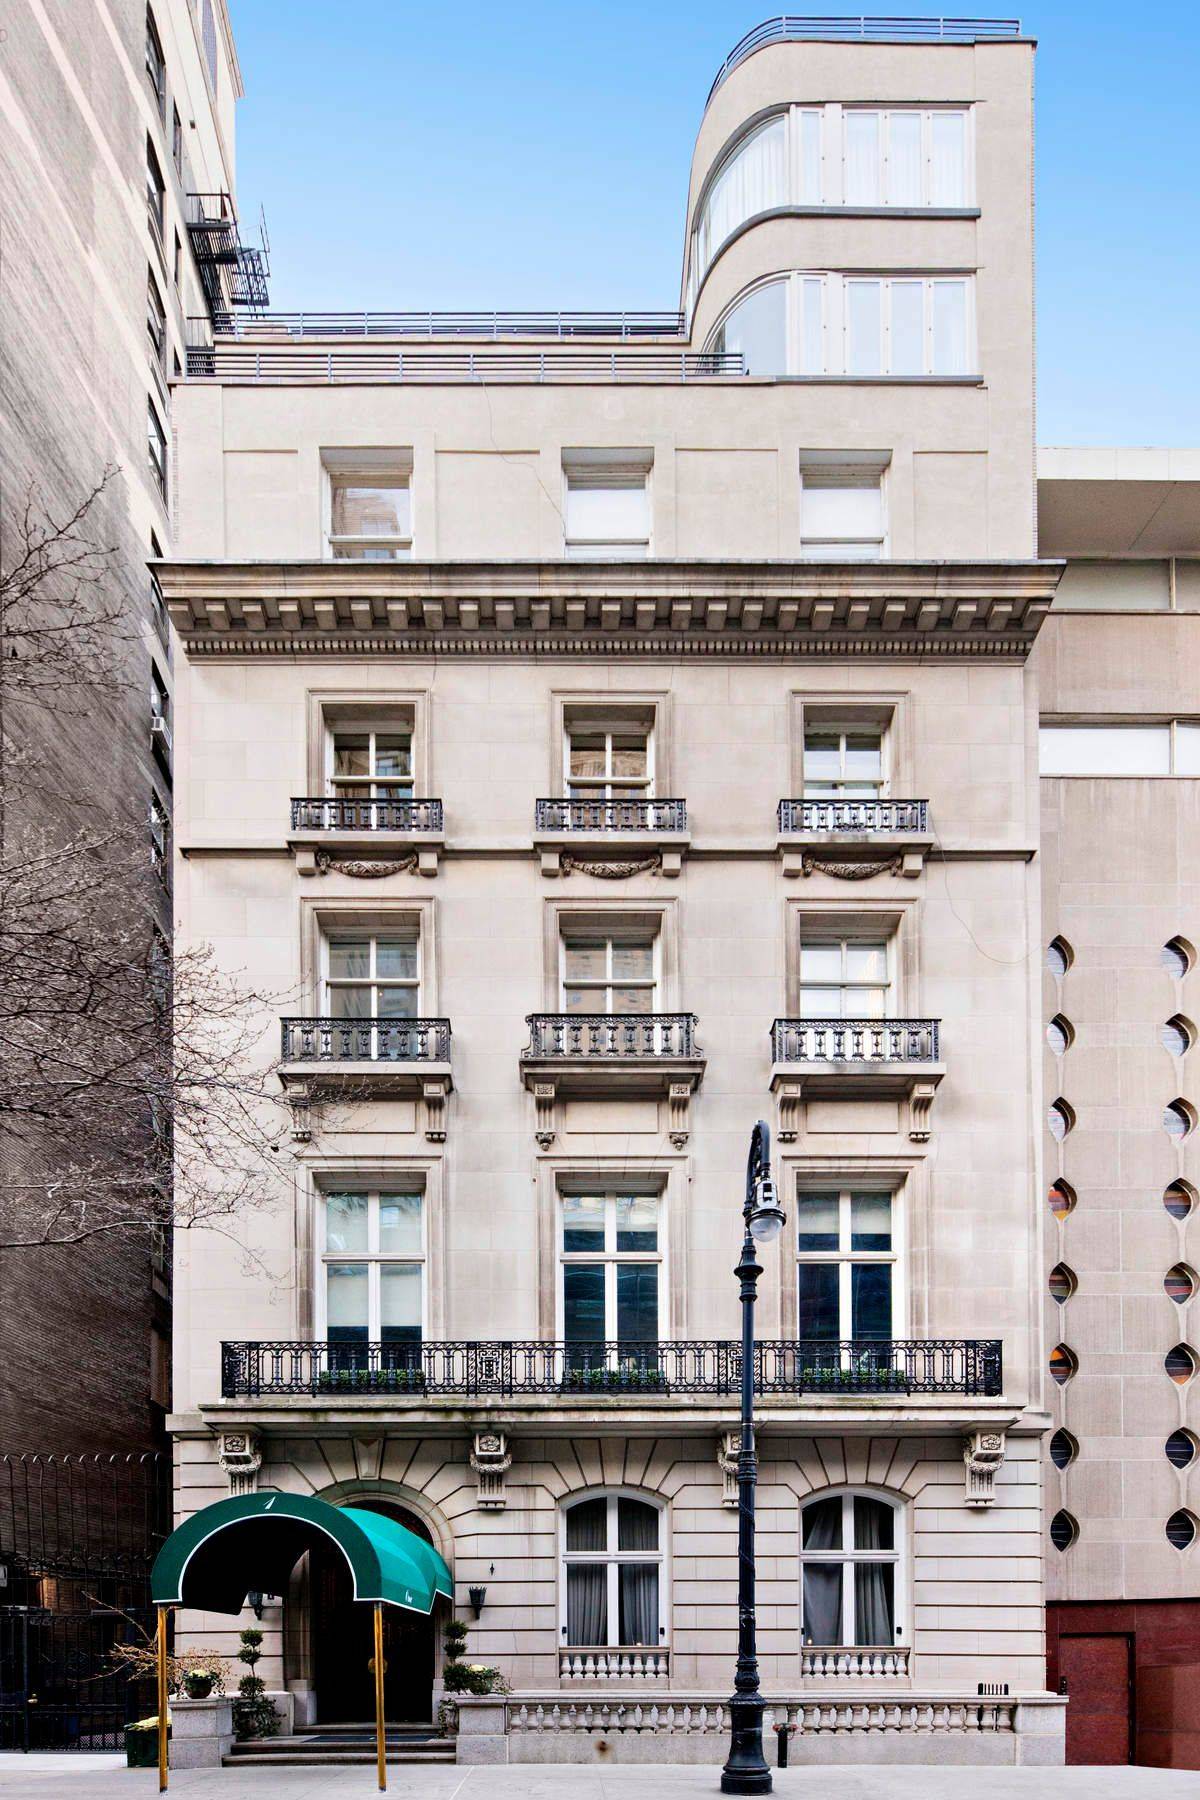 Perfectly situated on East 62nd Street between Fifth and Madison Avenues, this grandly scaled full floor condominium residence is situated atop one of Manhattan's finest residential landmarks, the Drexel Mansion.